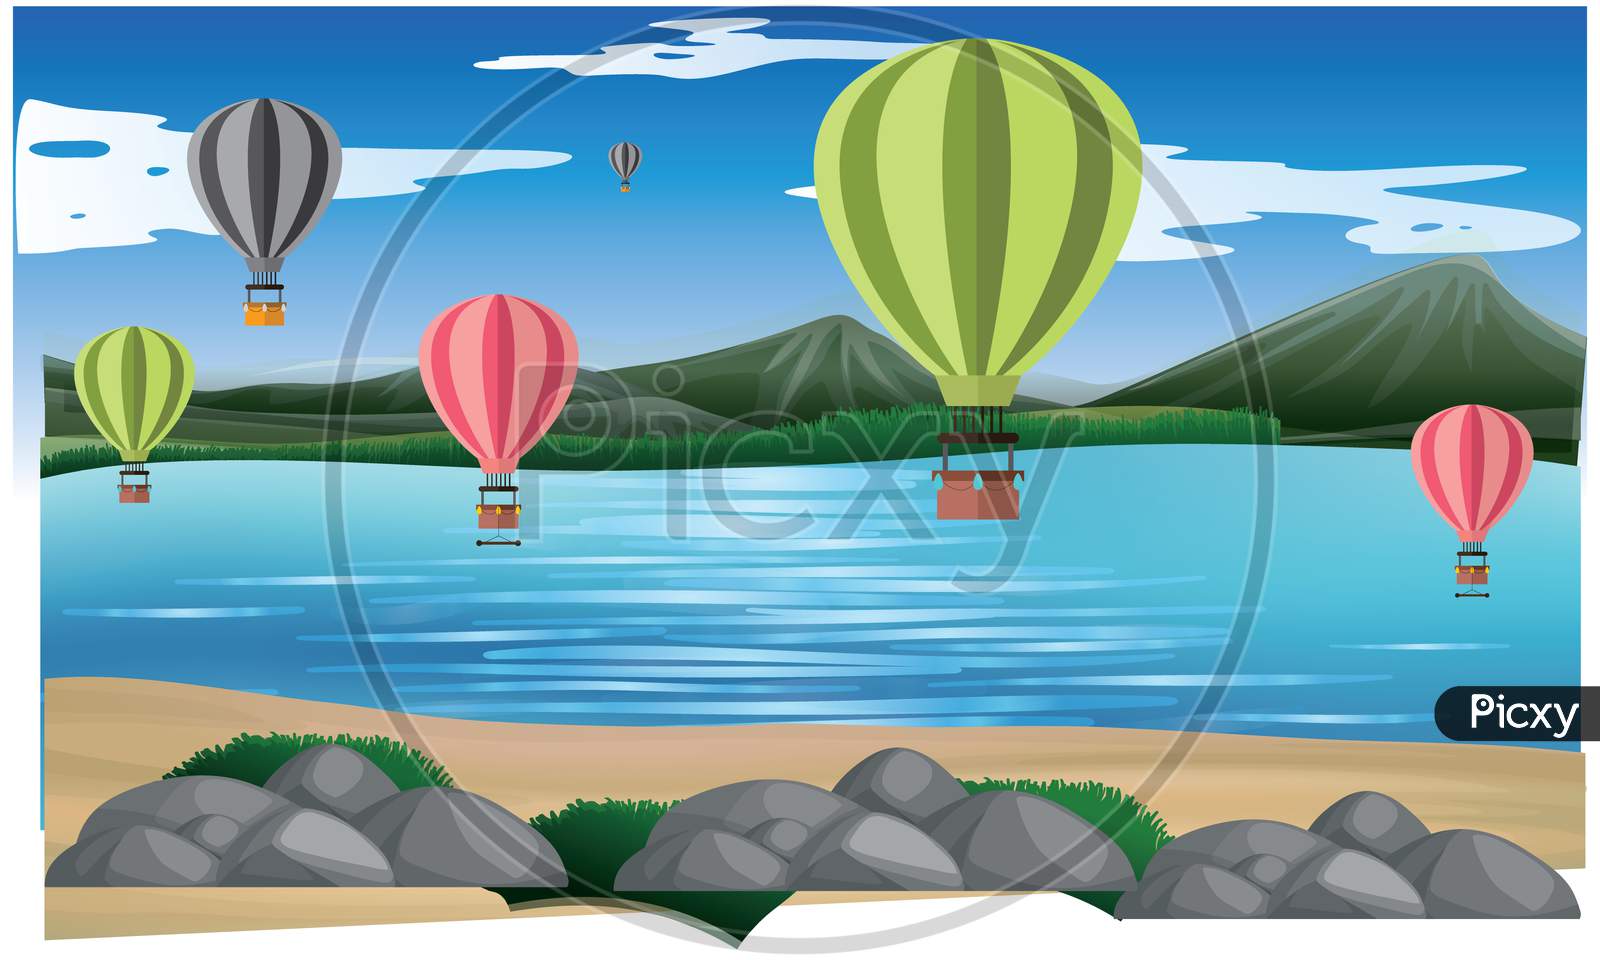 Hot Air Balloons Are Flying In Air On The Beach Near Mountains